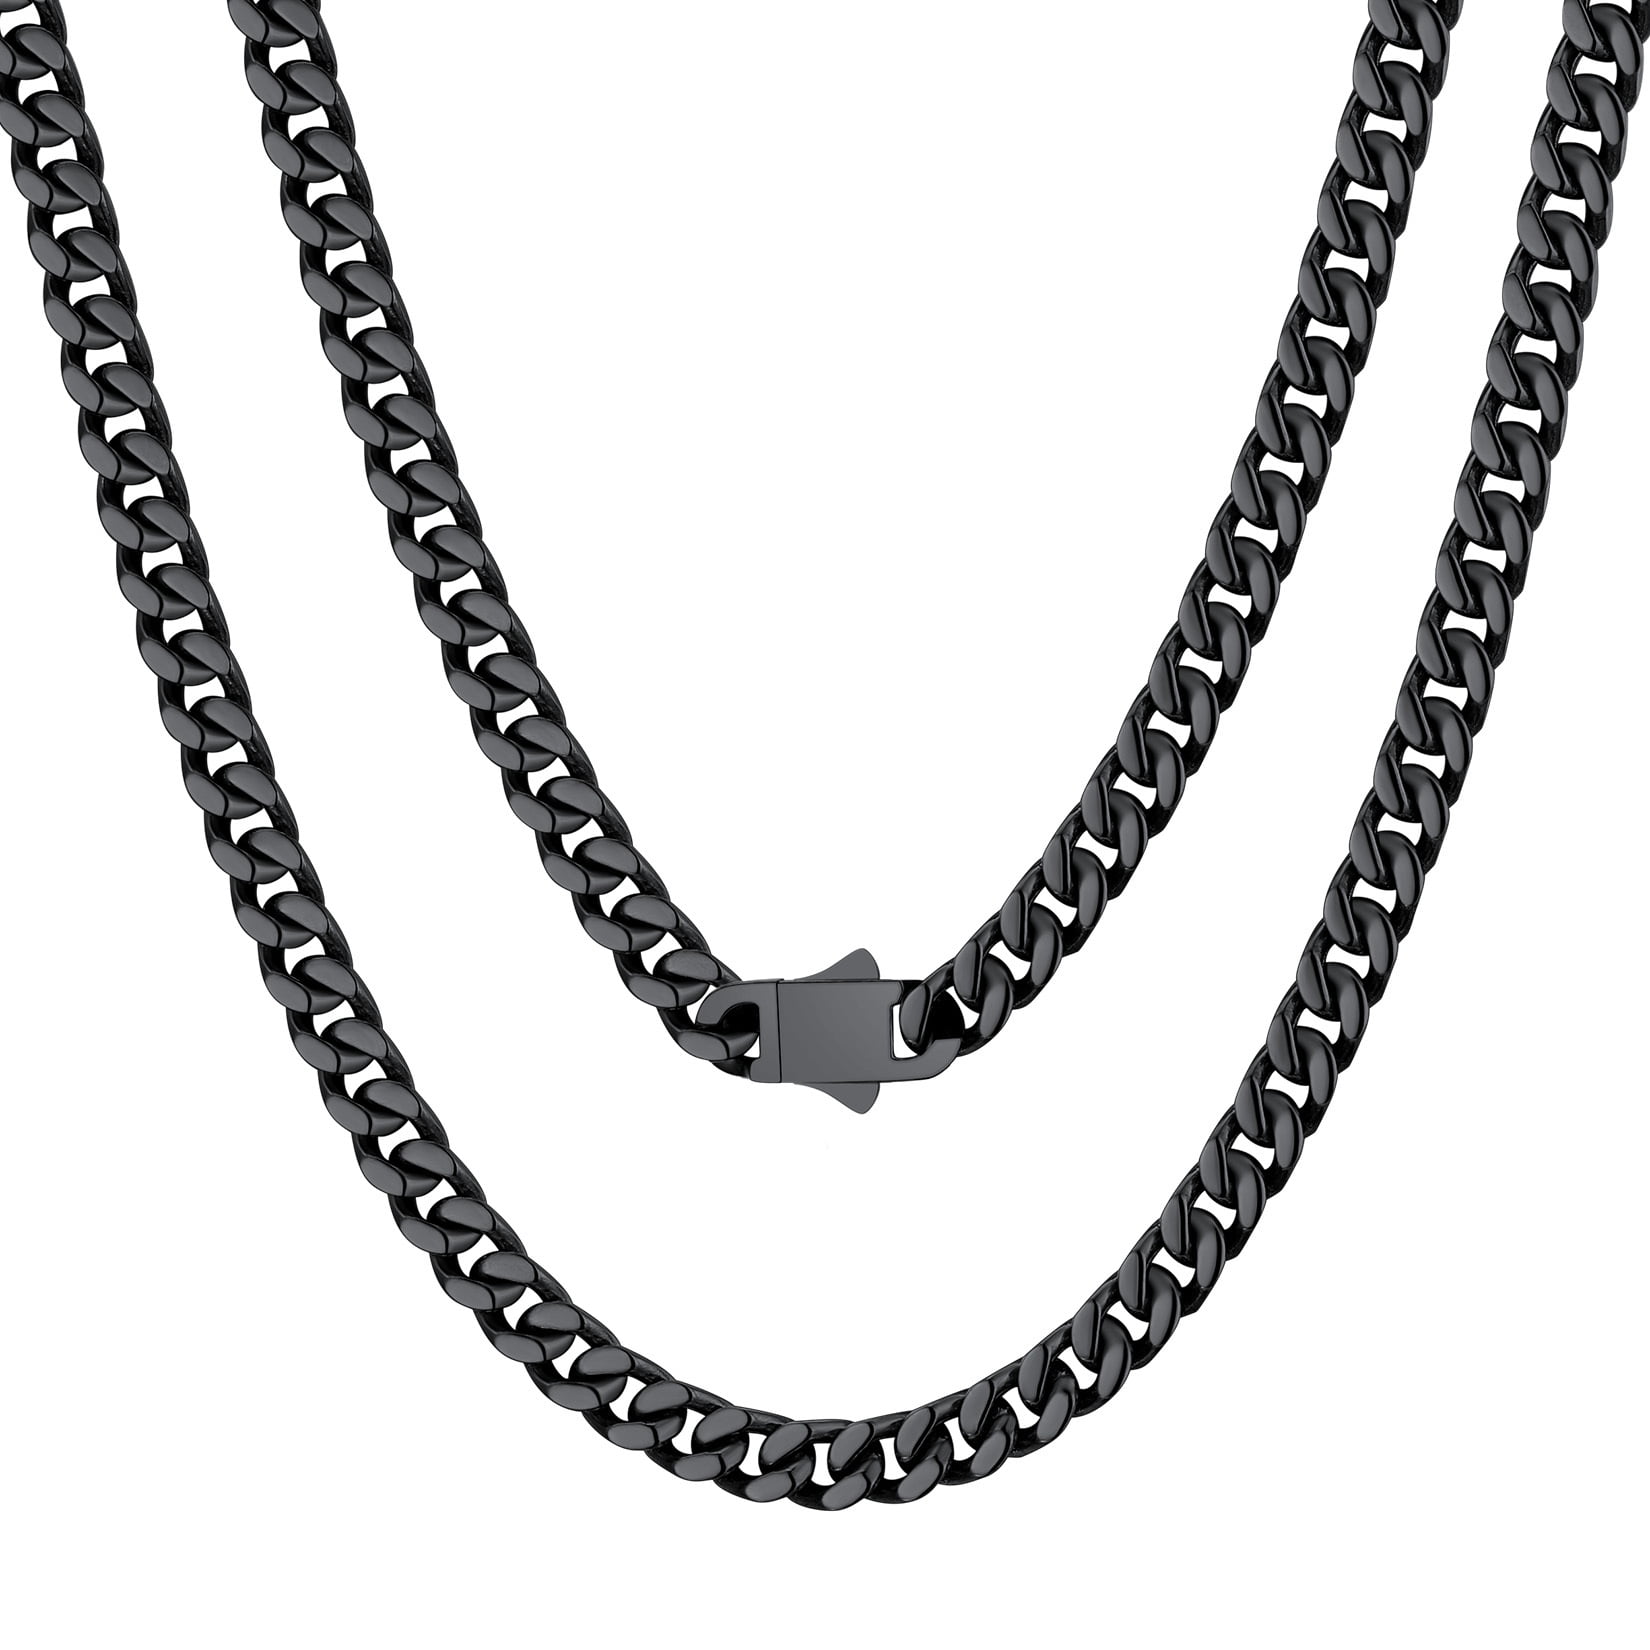 1.5mm-5mm 10-100 Black or Silver Stainless Steel Ball Chain Necklace 